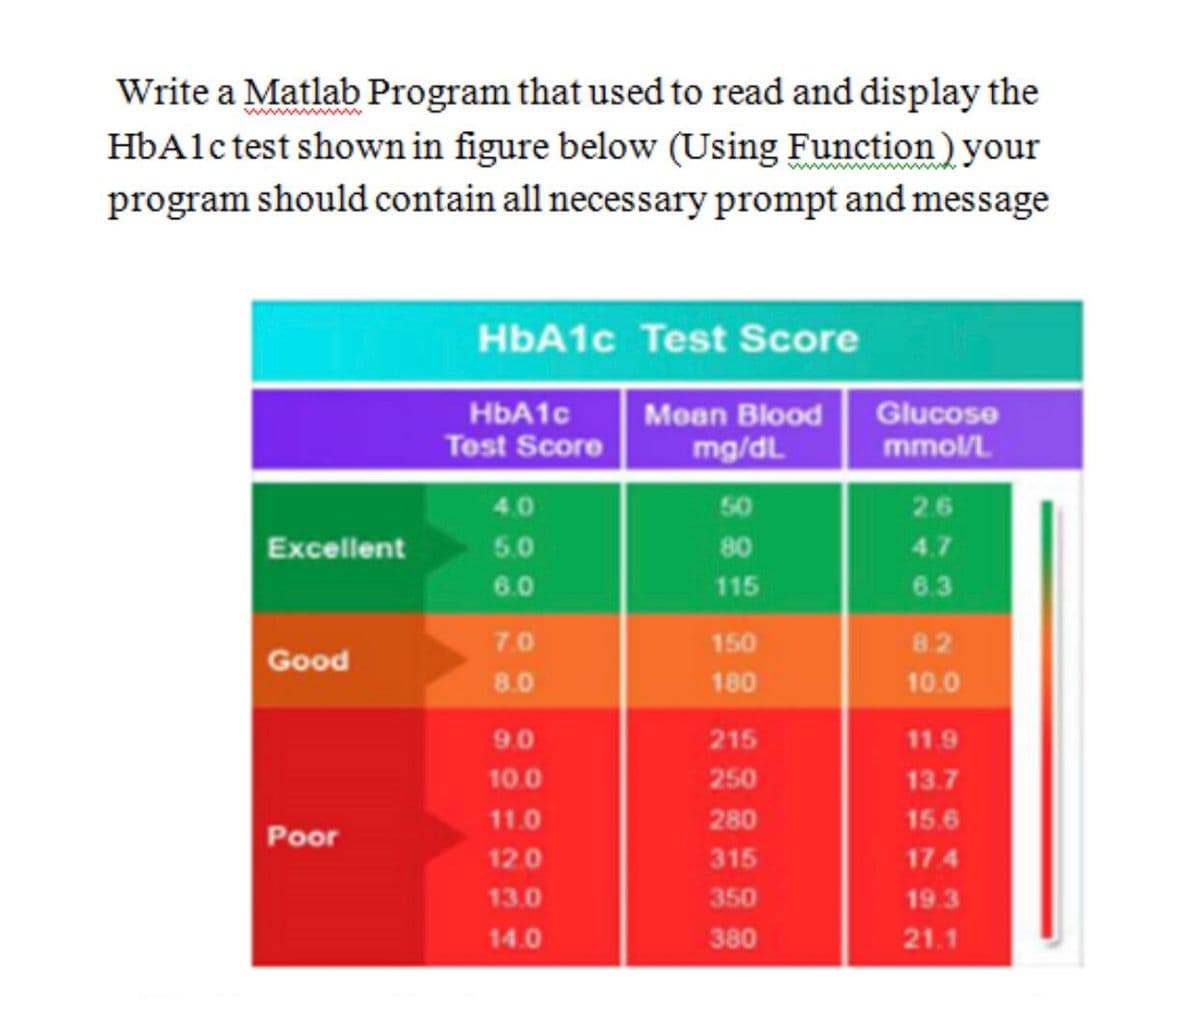 Write a Matlab Program that used to read and display the
HbAlc test shown in figure below (Using Function) your
program should contain all necessary prompt and message
www
HbA1c Test Score
HBA1C
Test Score
Glucose
mmol/L
Moan Blood
mg/dL
4.0
50
26
Excellent
5.0
80
4.7
6.0
115
6.3
7.0
150
82
Good
8.0
180
10.0
90
215
11.9
10.0
250
13.7
11.0
280
15.6
Poor
12.0
315
17.4
13.0
350
19.3
14.0
380
21.1
